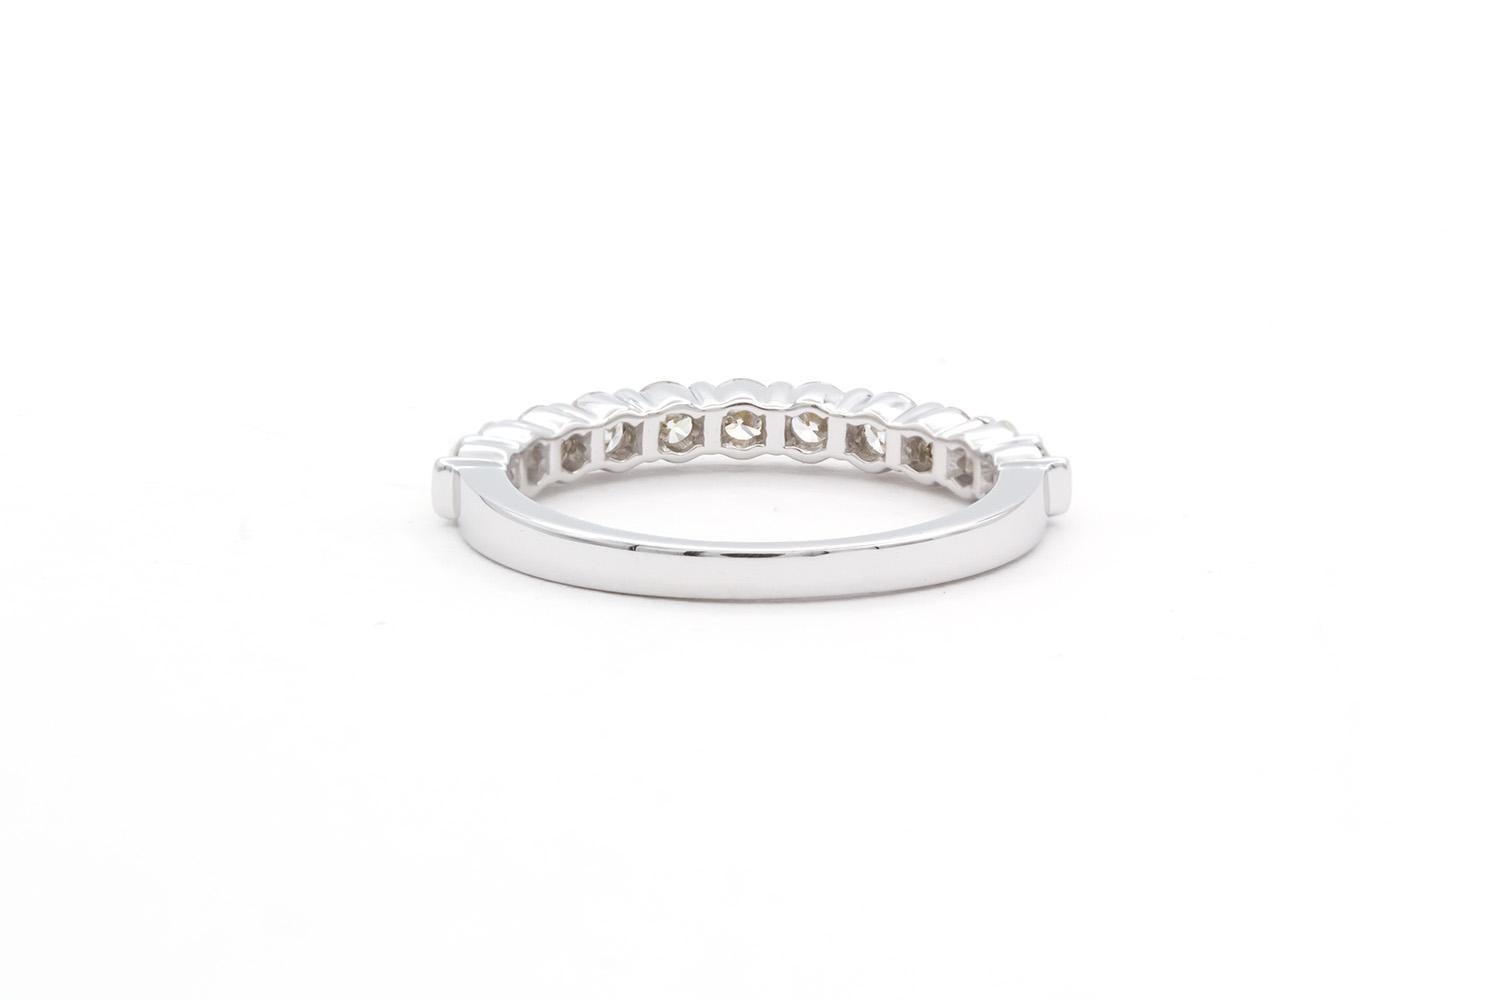 Tiffany & Co. 18k White Gold & Diamond Tiffany Diamond Wedding Band 2.75mm In Excellent Condition For Sale In Tustin, CA